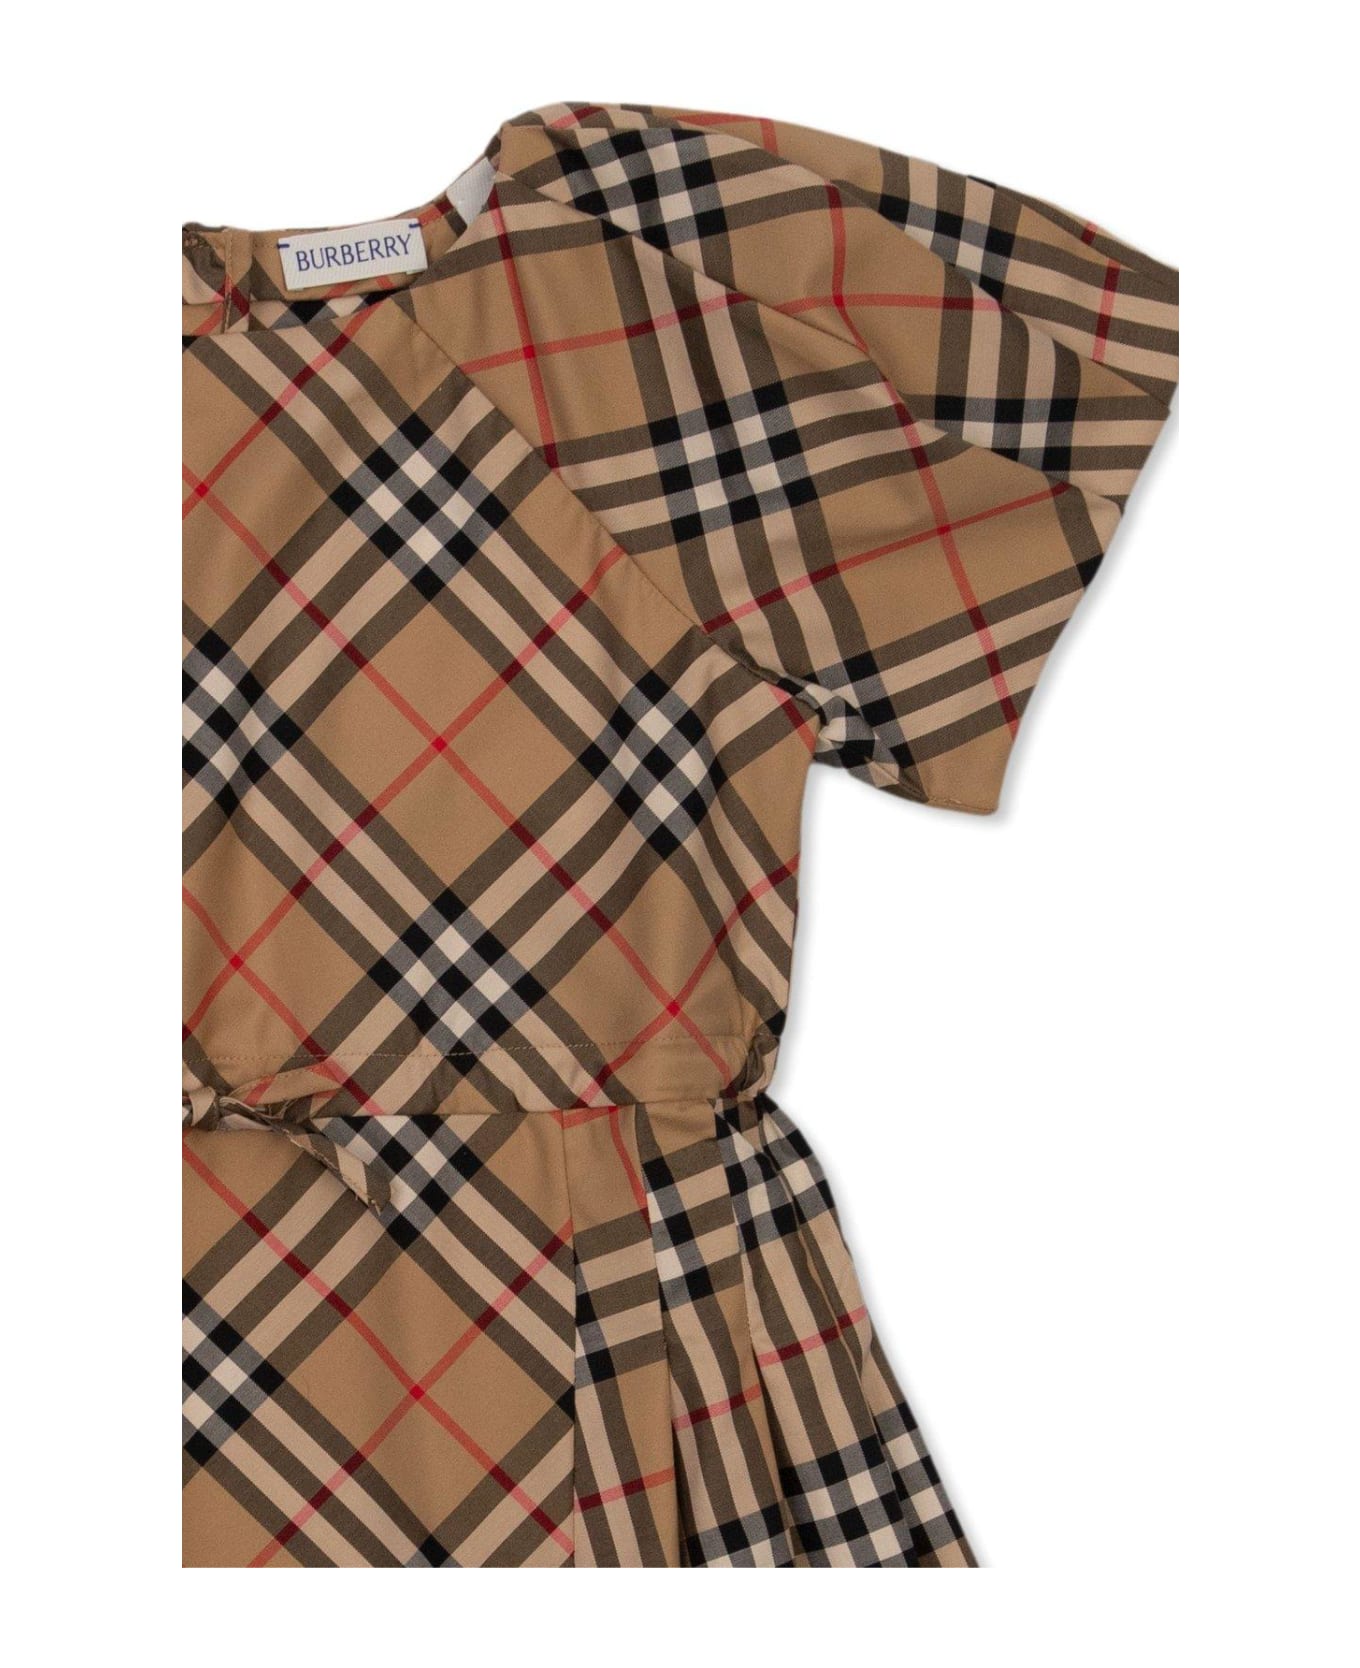 Burberry Checked Short-sleeved Dress - Archive beige ip chk ジャンプスーツ